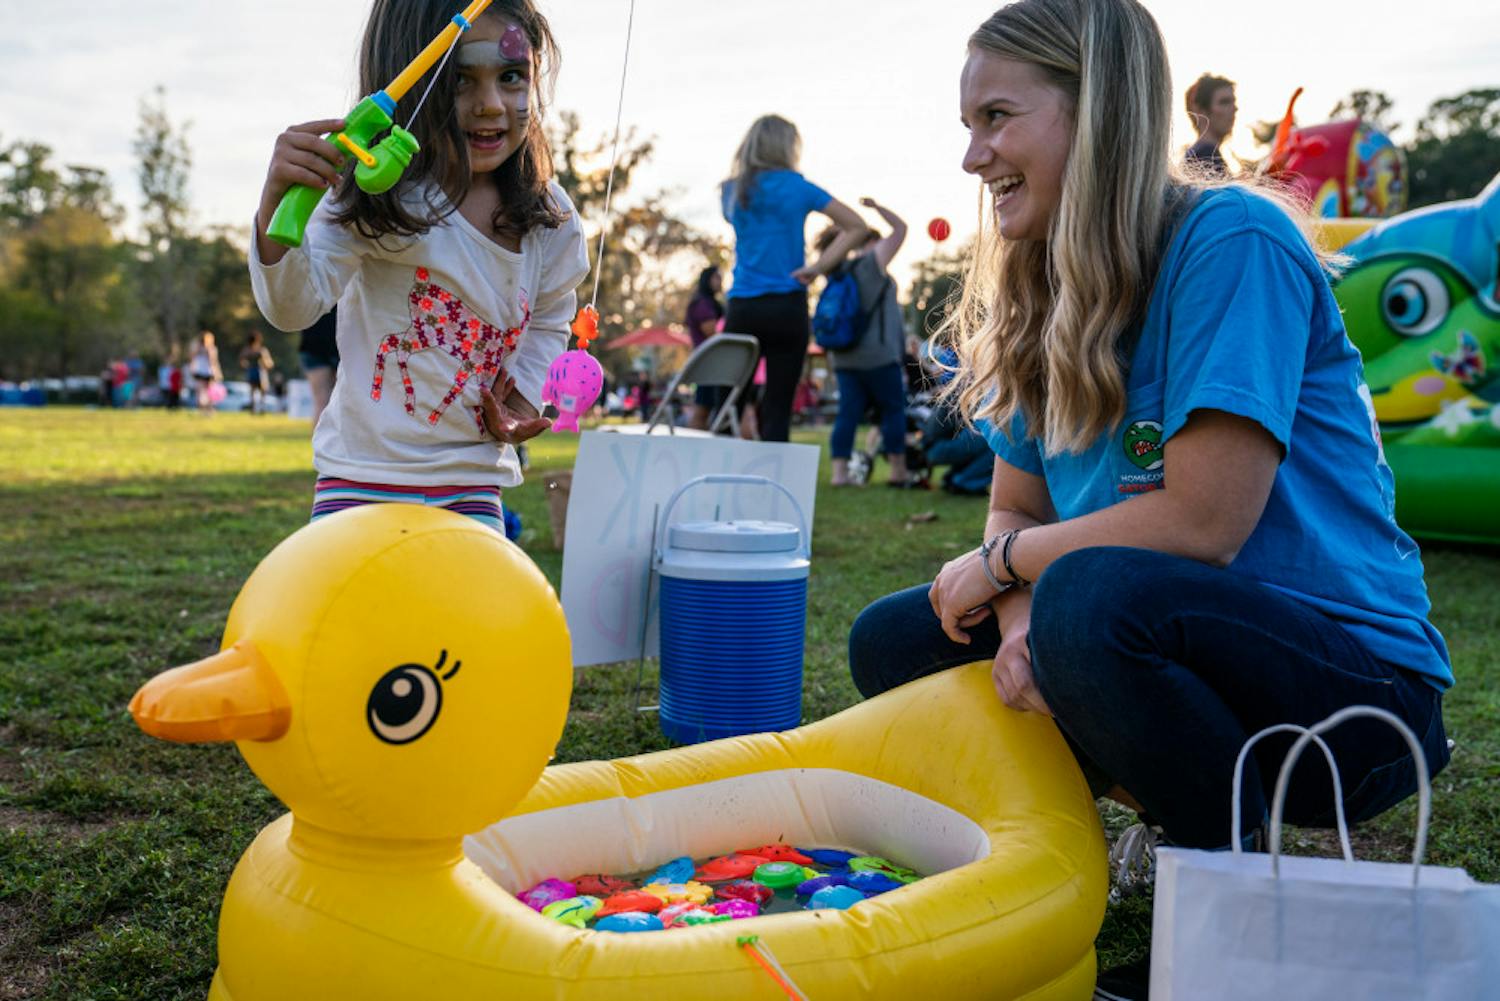 Volunteer Drew McCullough, 18, laughs as she watches a child fish for prizes during Sunday's “Hey, Neighbor!” carnival held at Magnolia Parke Square. McCullough, a UF sociology freshman, was recently diagnosed with Type 1 diabetes and received support from the UF Diabetes Institute's support group. The institute, along with UF's College Diabetes Network chapter, hosted the event to celebrate National Diabetes Awareness Month. 